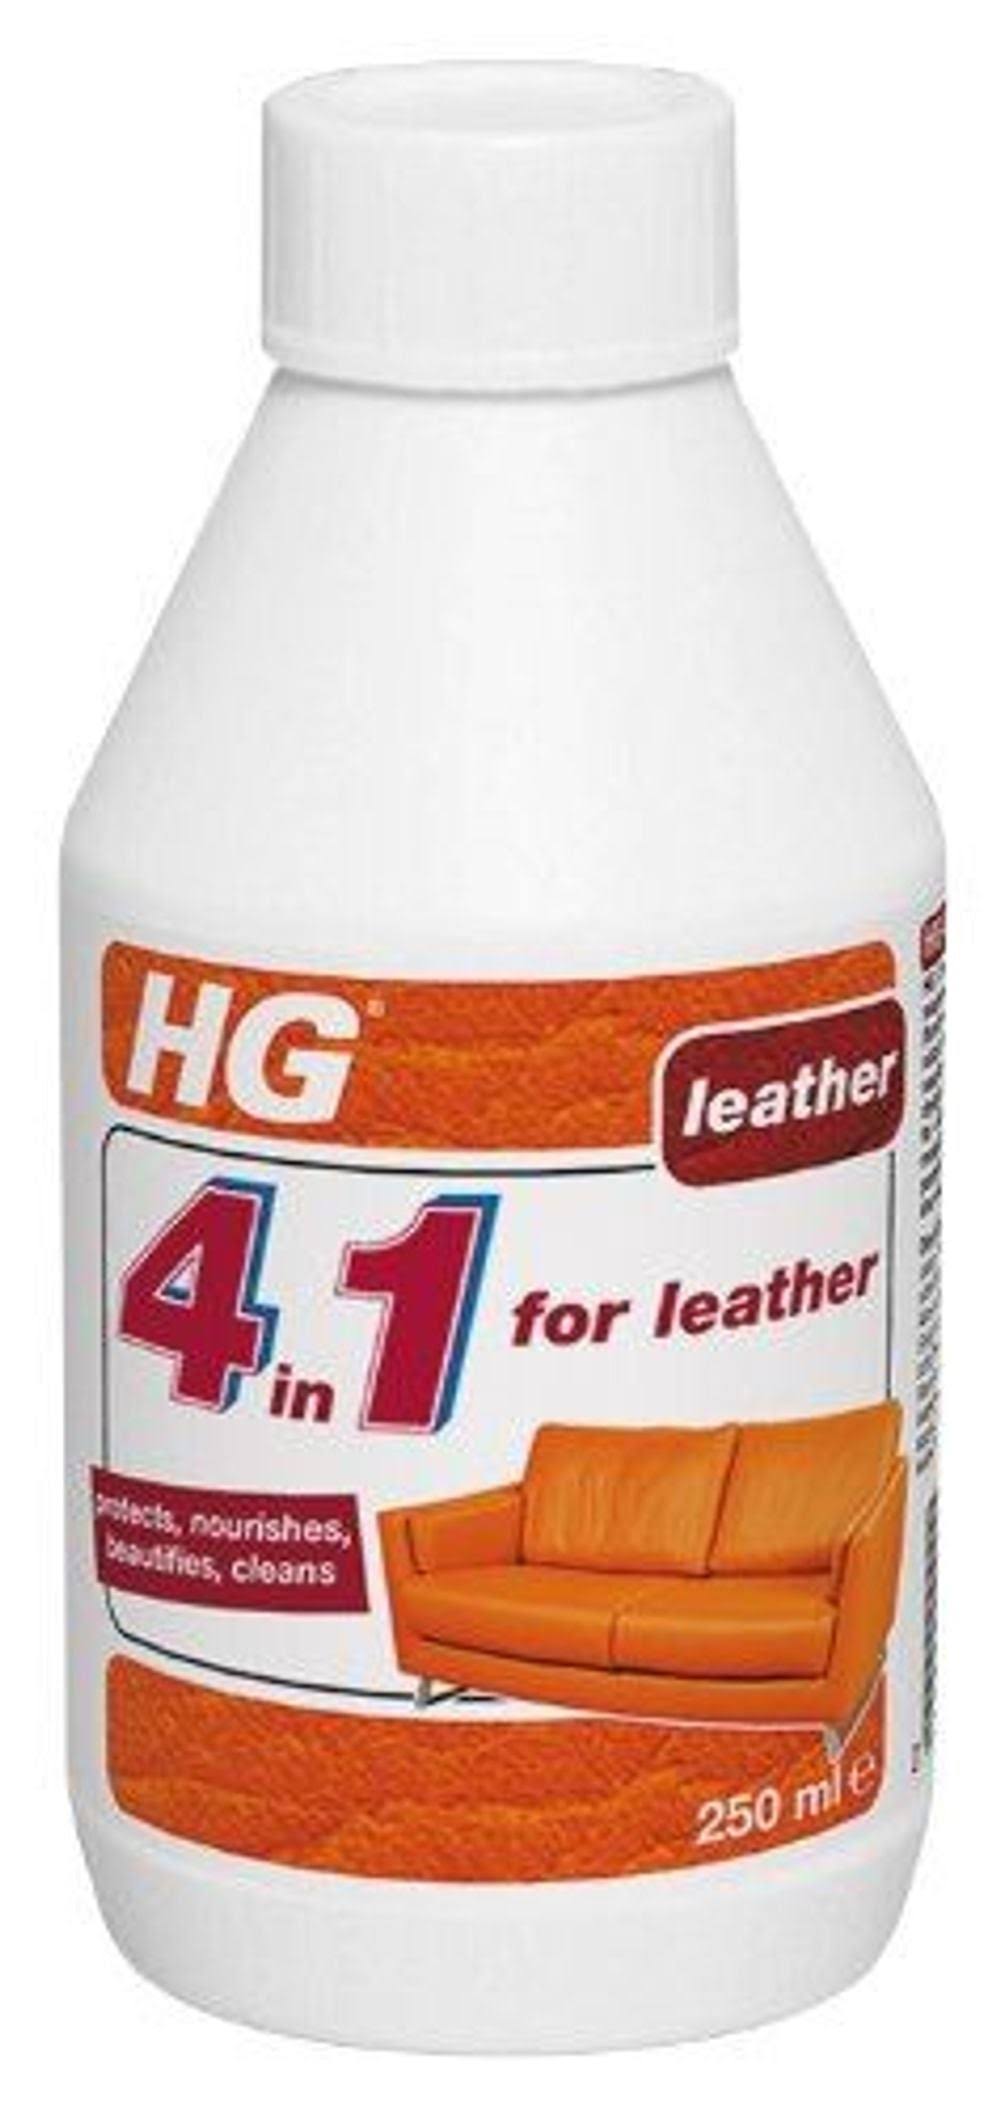 HG 4 in 1 for Leather - 250ml